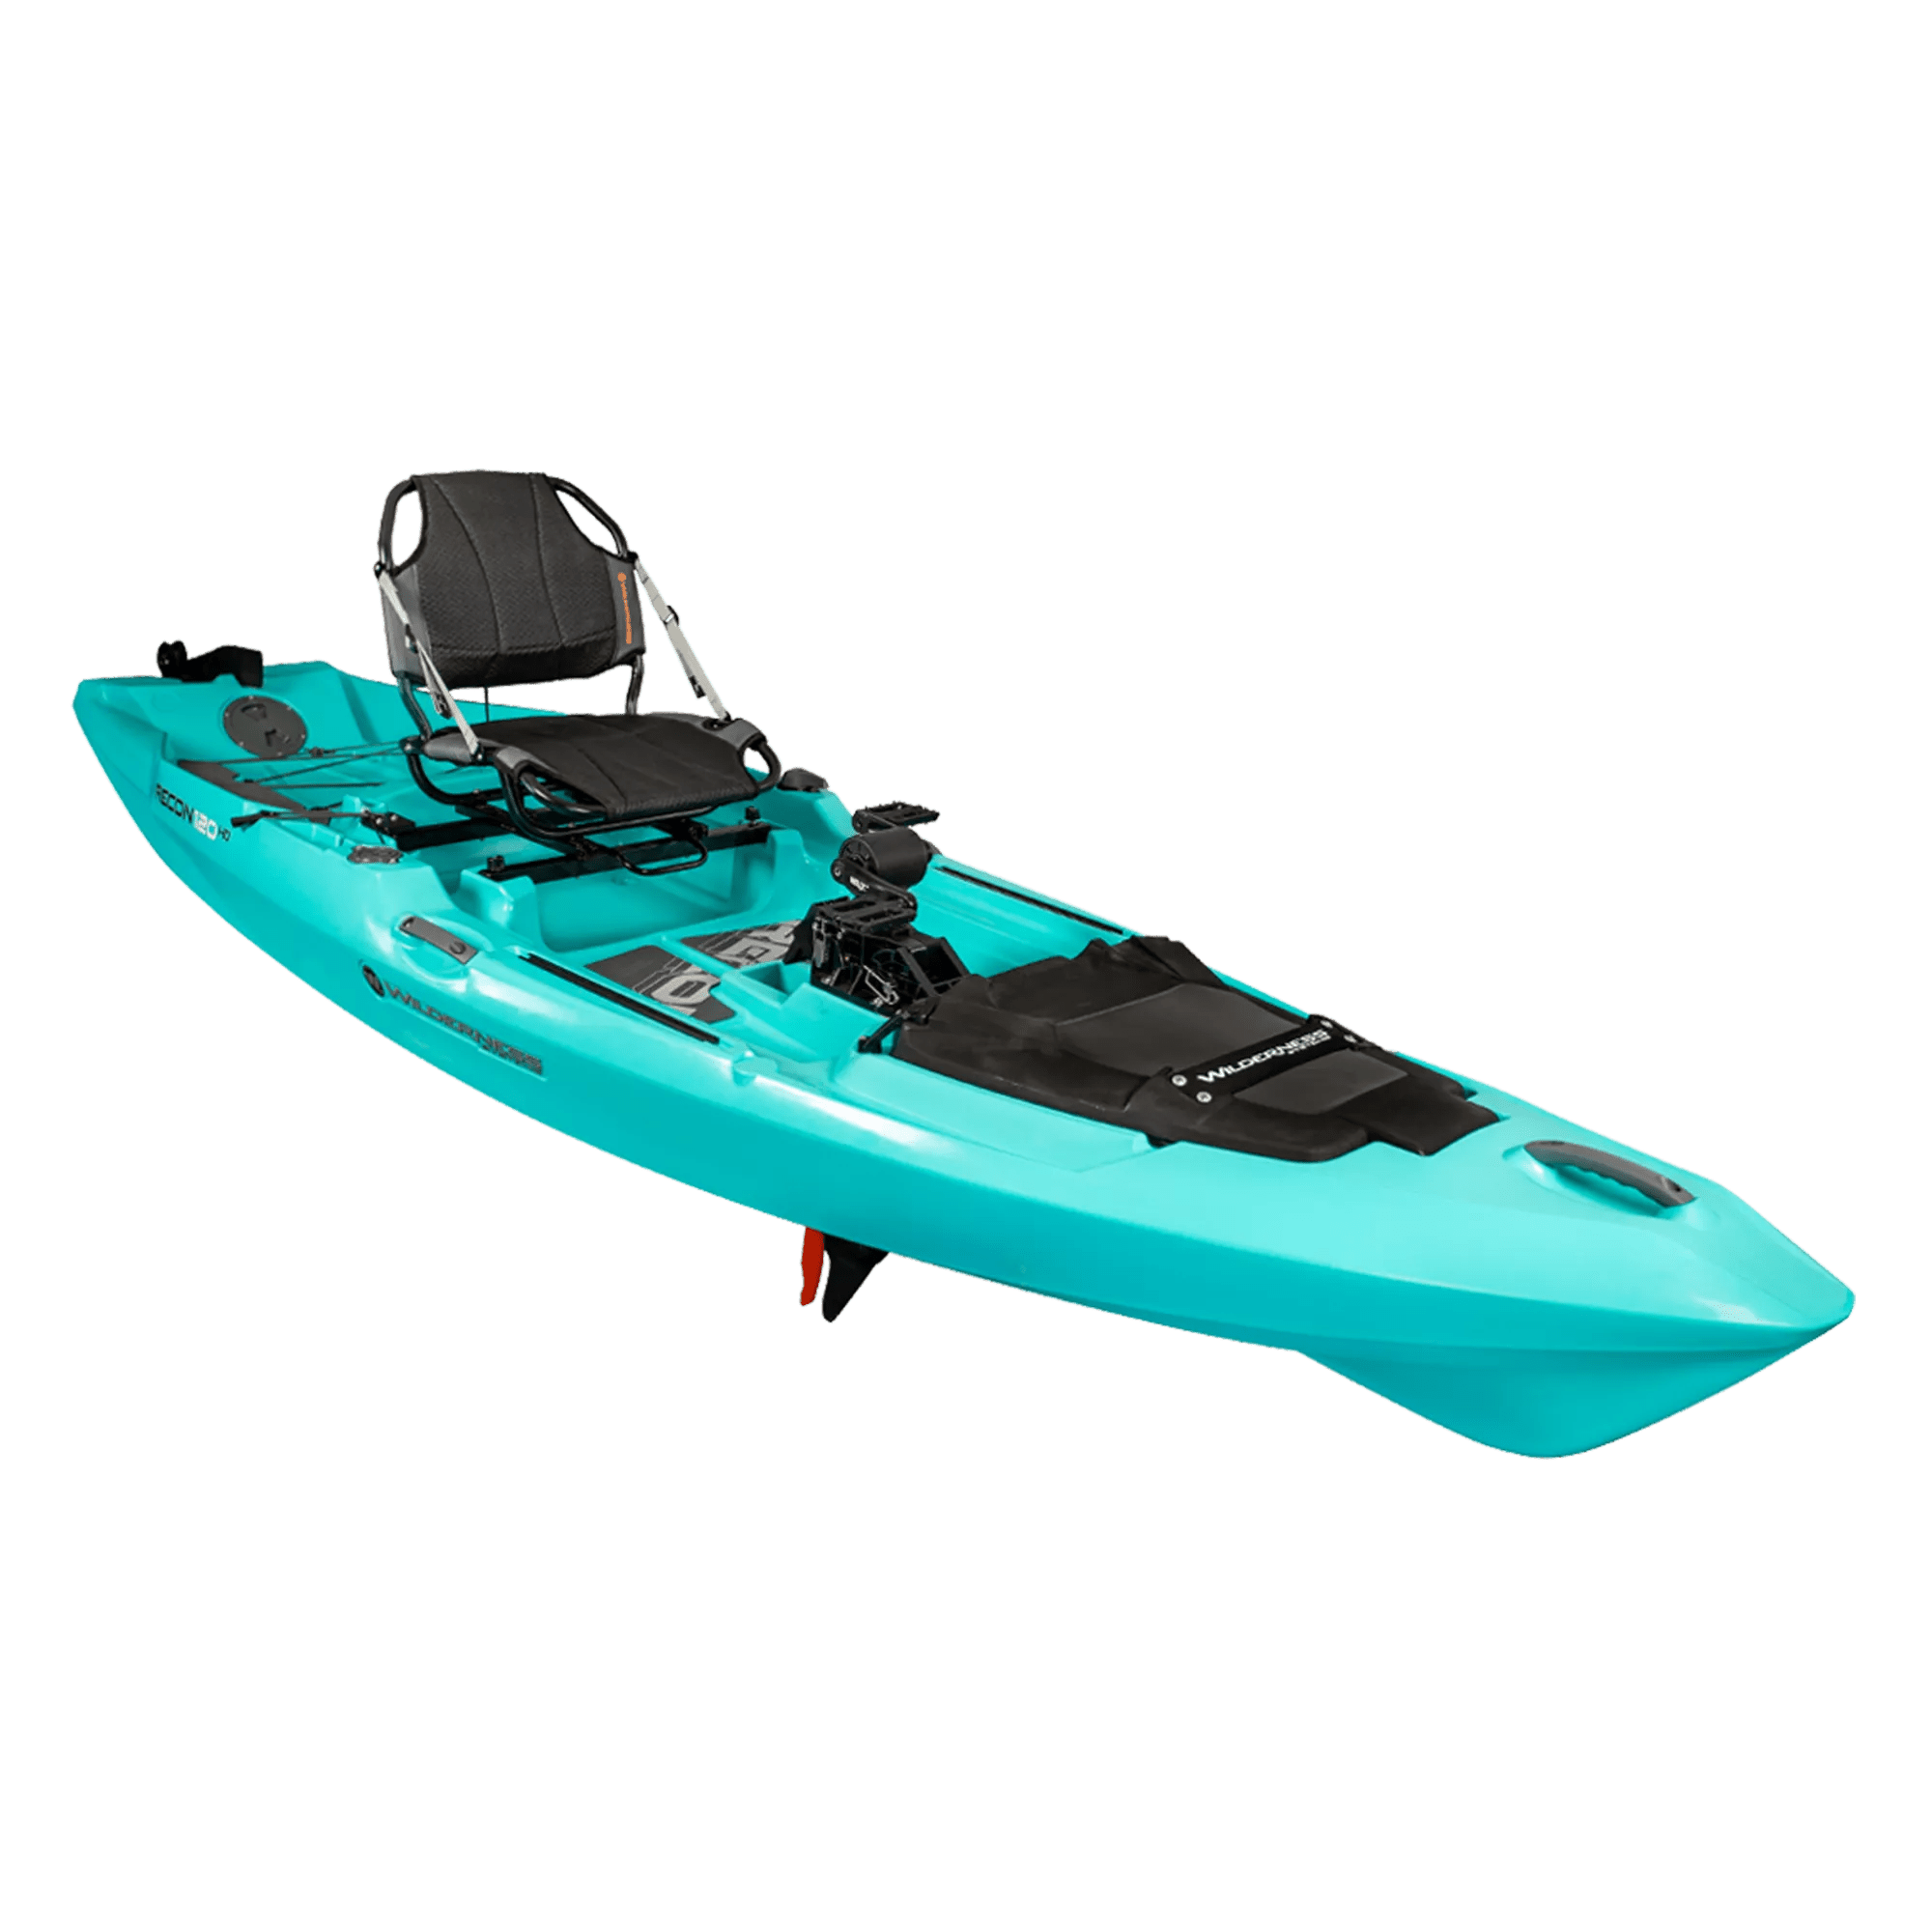 WILDERNESS SYSTEMS - Recon 120 HD Fishing Kayak - Discontinued color/model - Aqua - 9751090192 - 